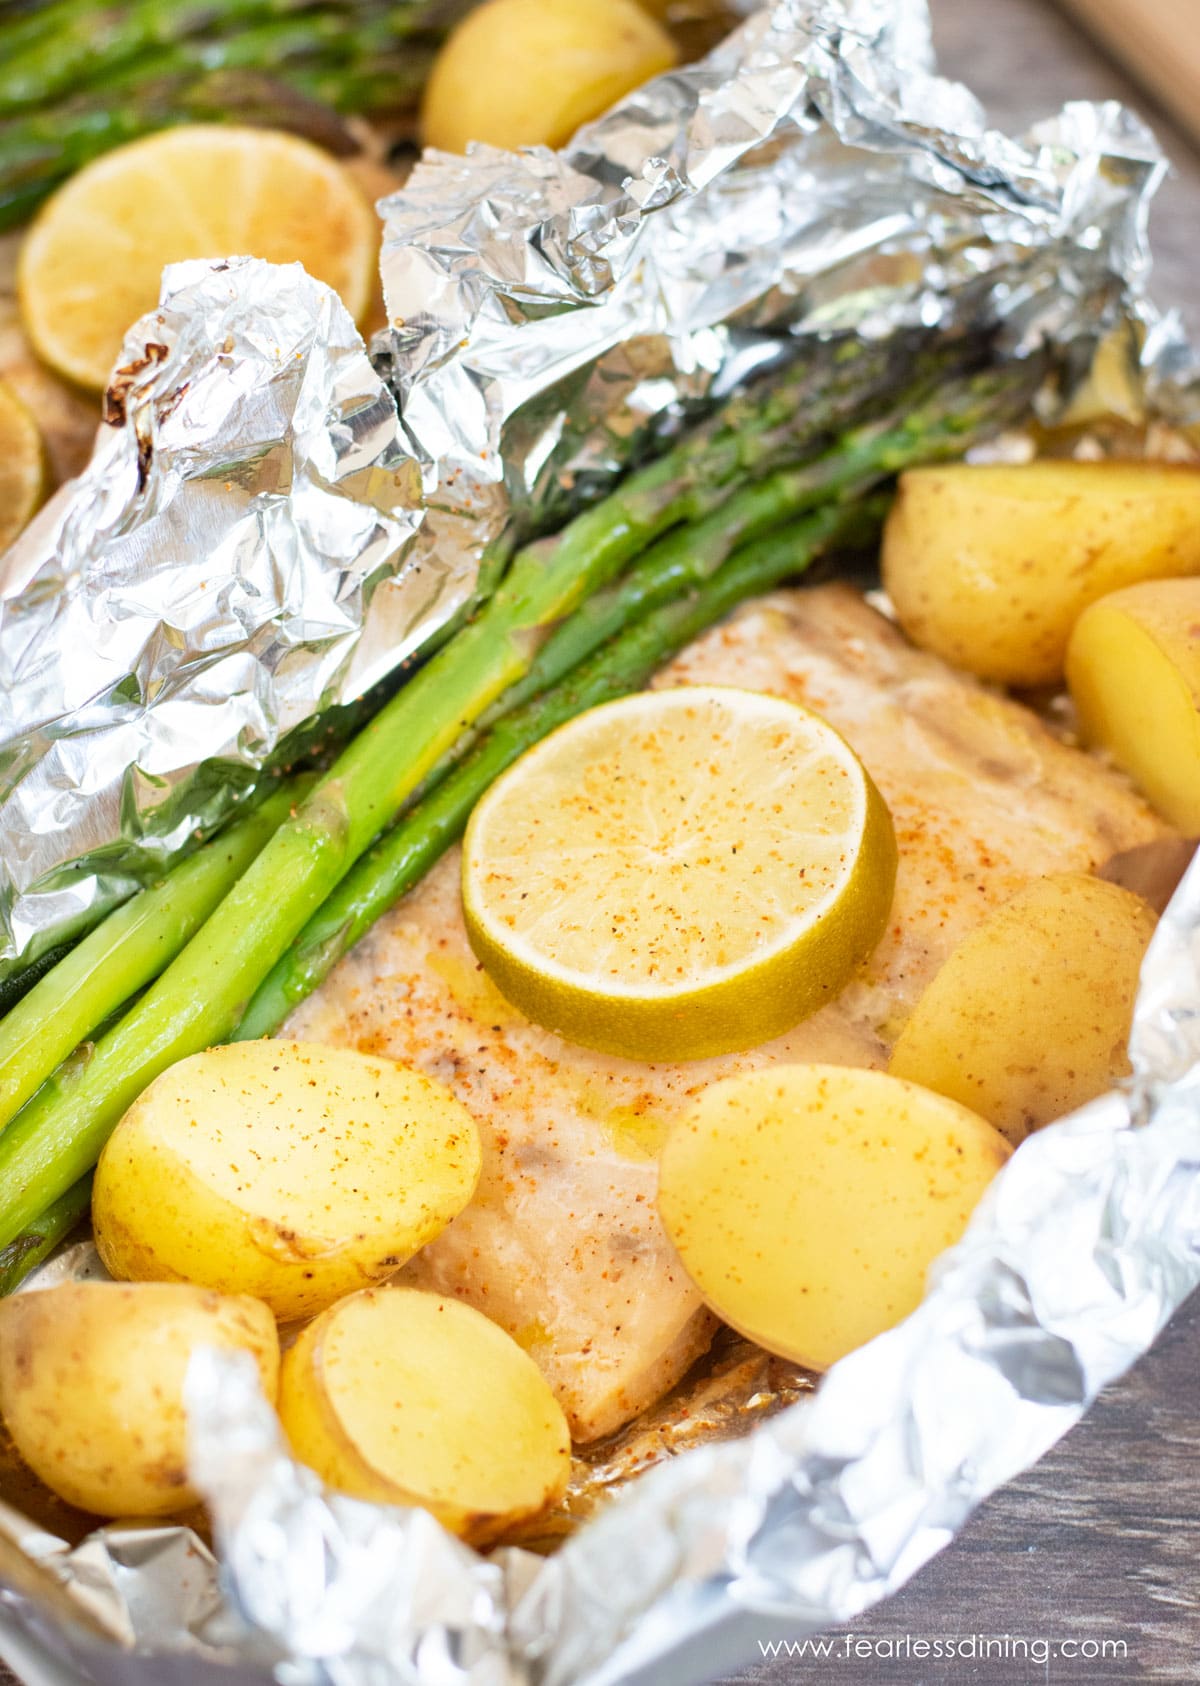 Cooked mahi mahi filet with asparagus and potatoes in a foil packet.